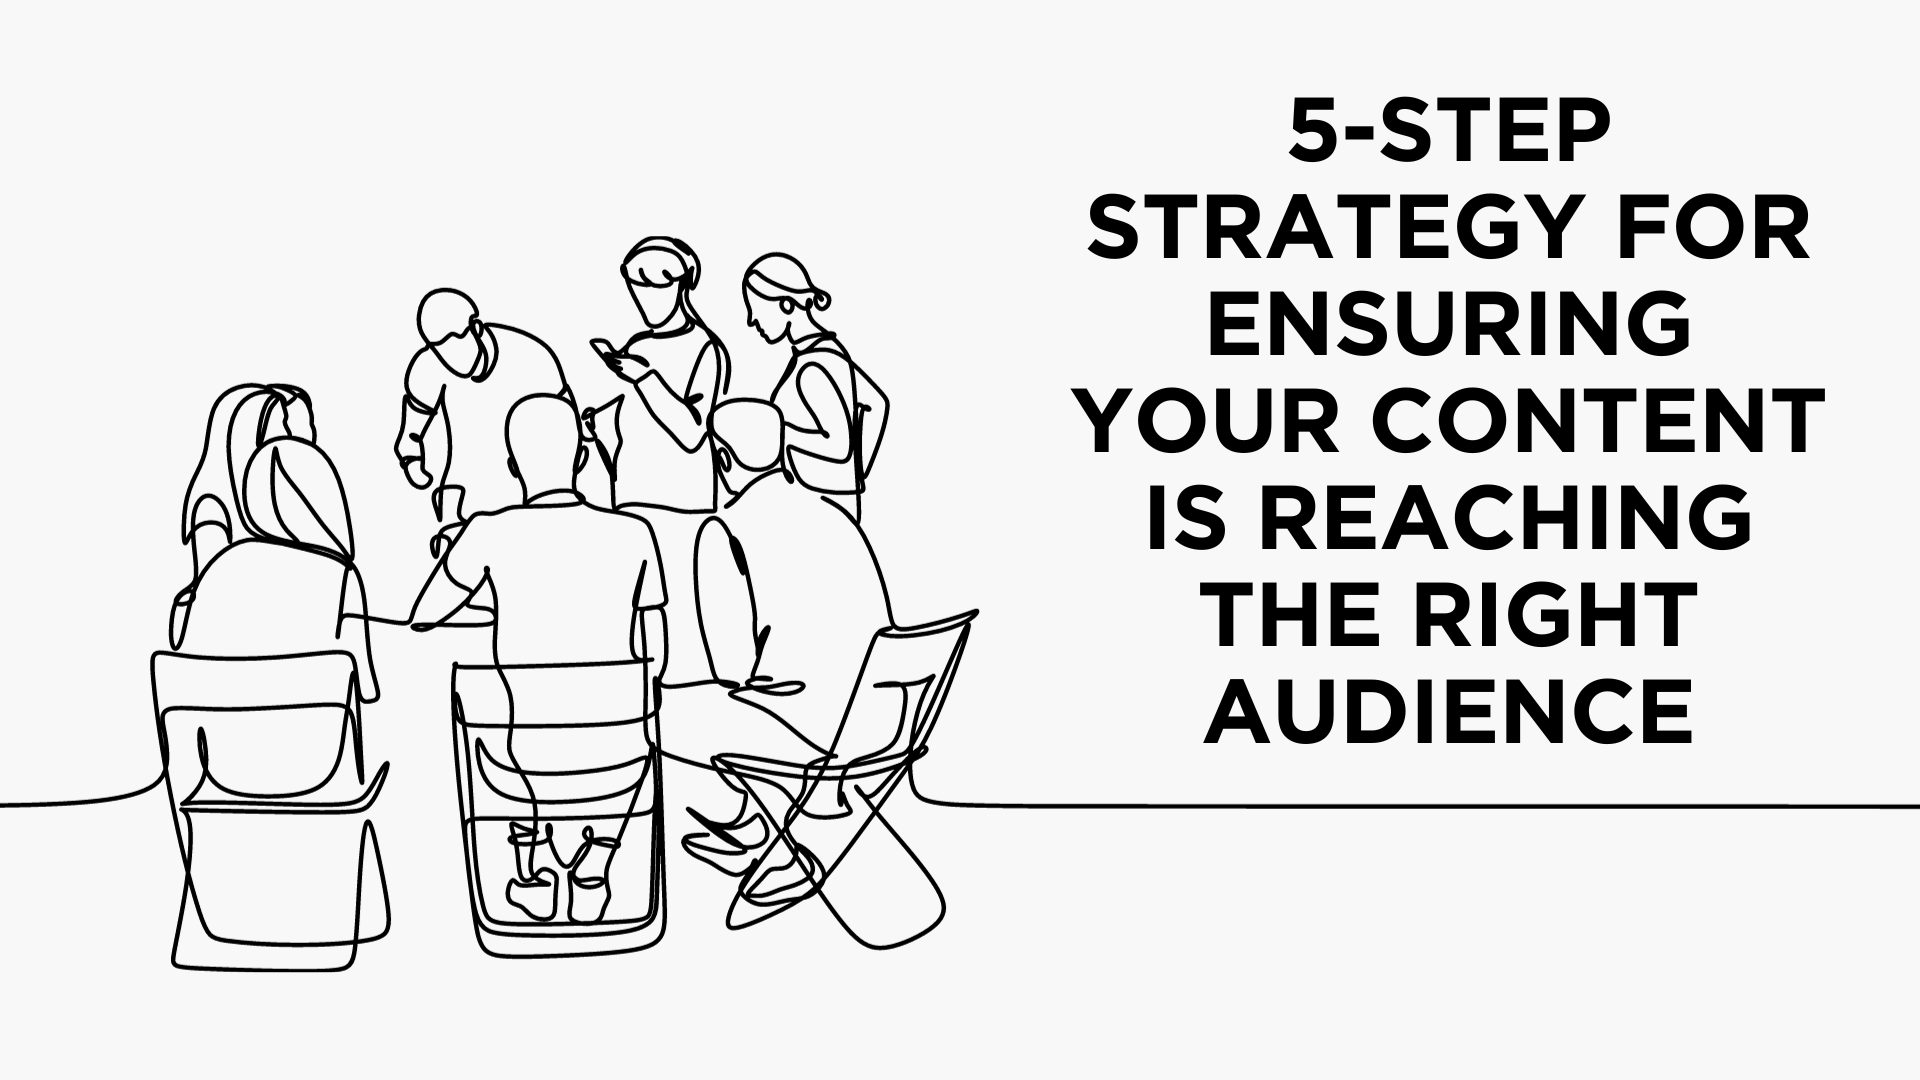 5-Step Strategy for Ensuring your Content is Reaching the Right Audience